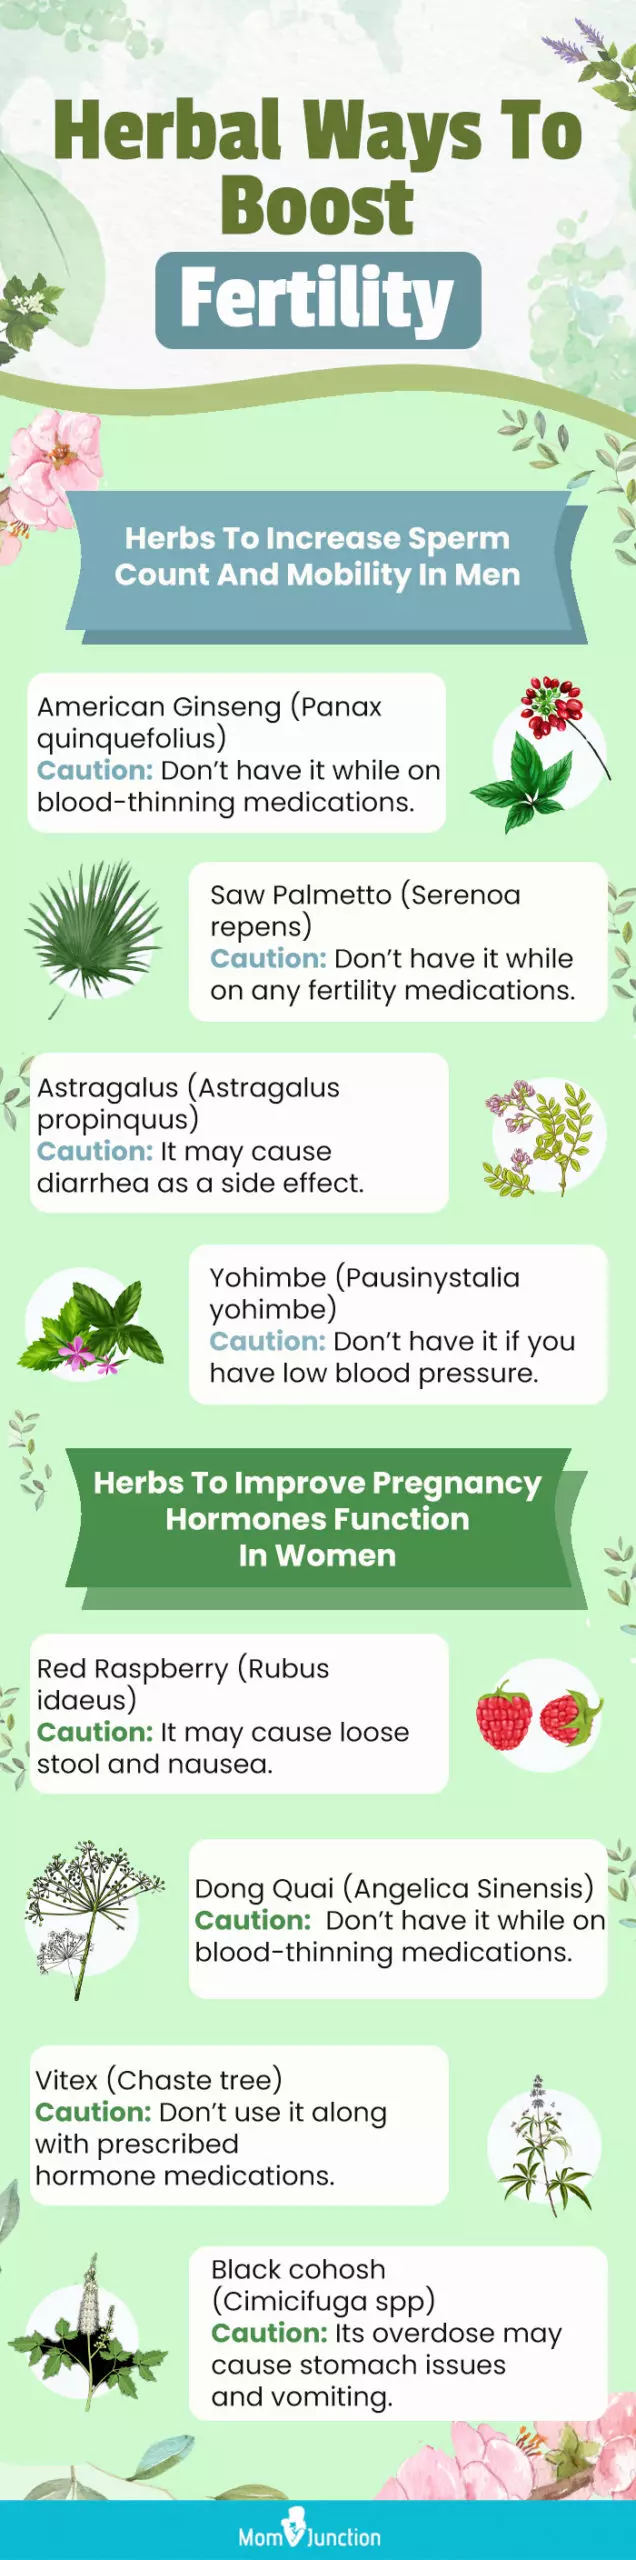 herbal ways to boost fertility (infographic)